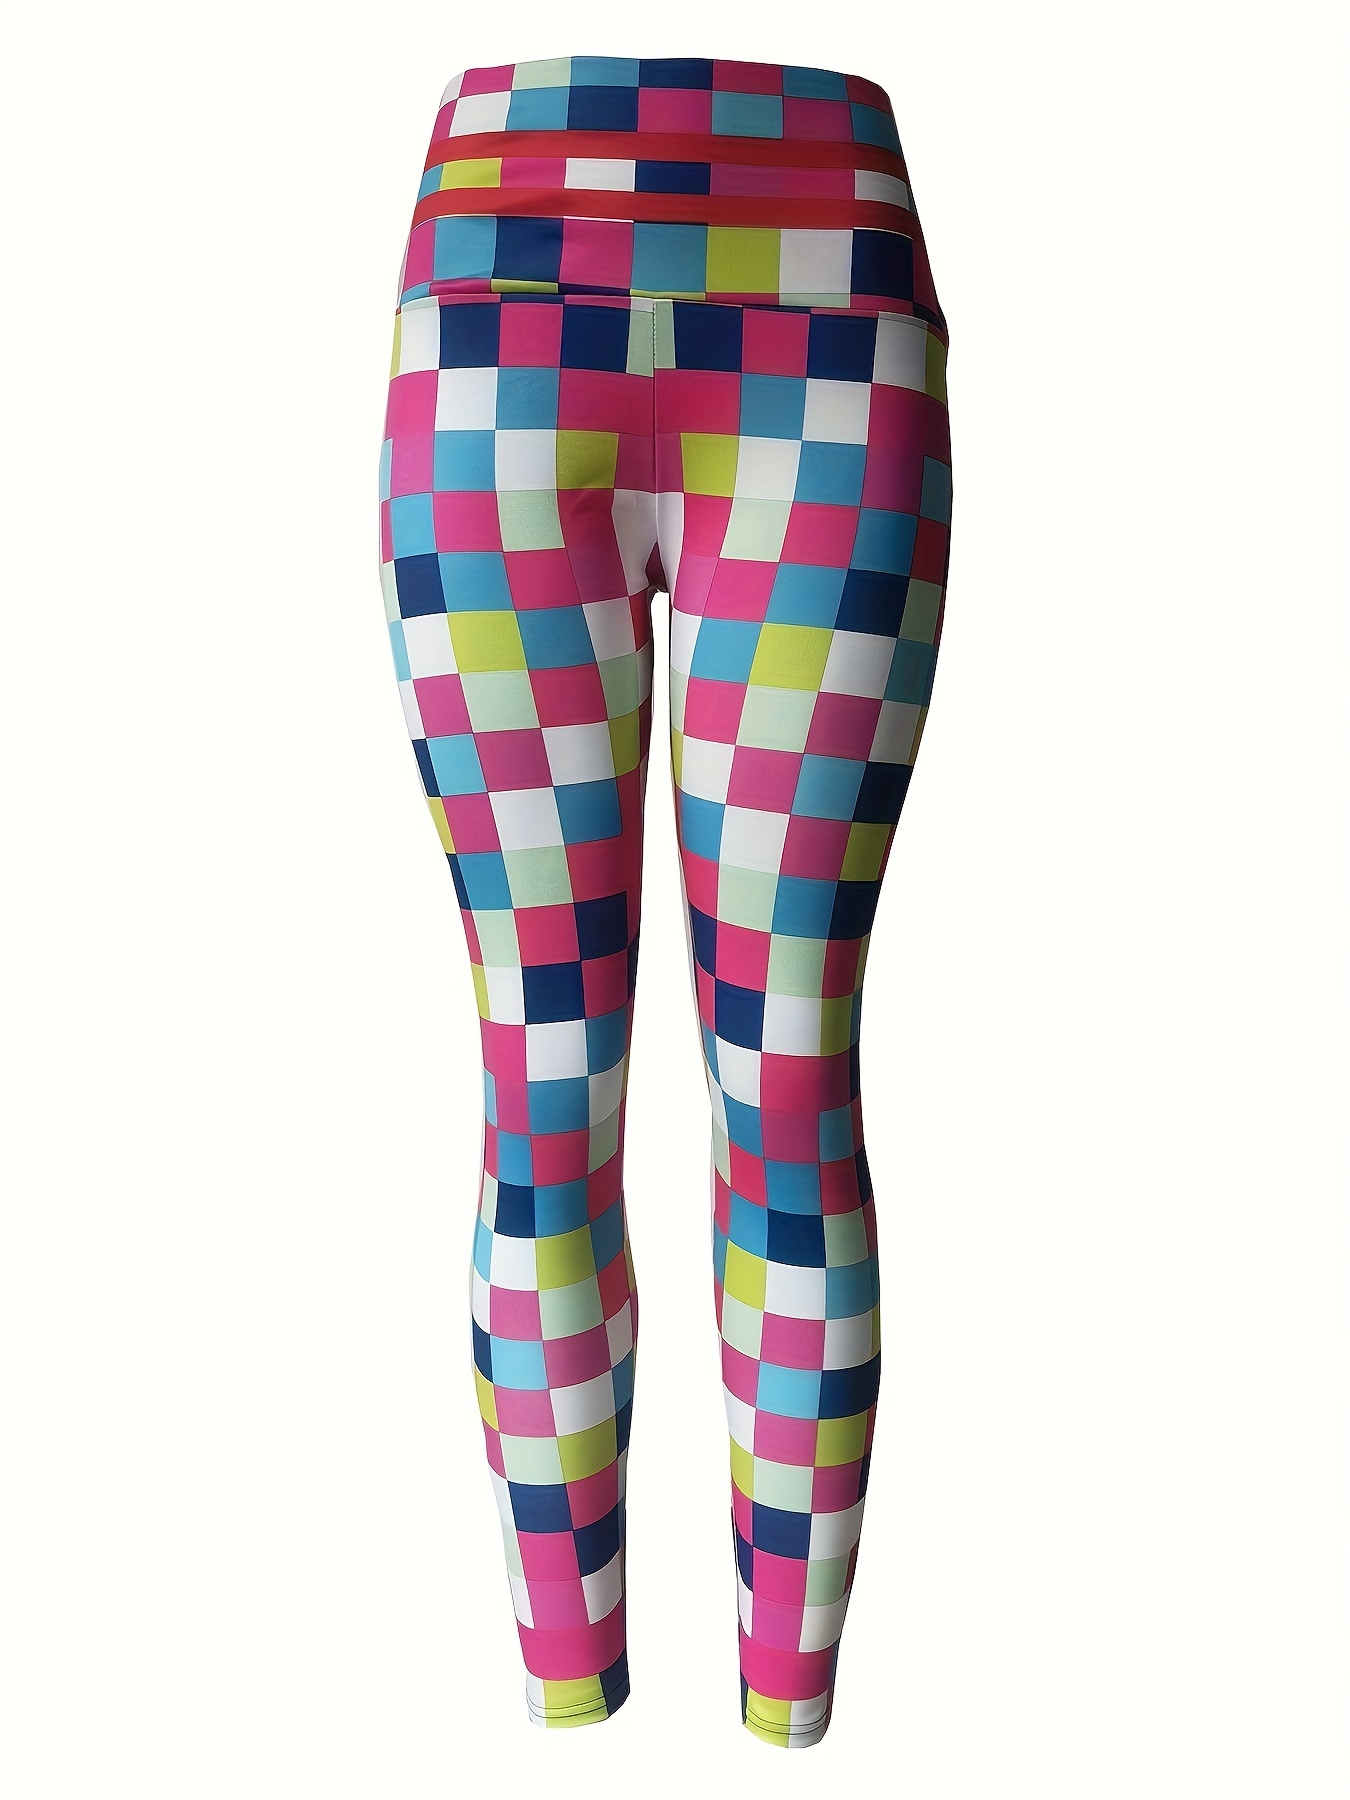 Checkerboard Plaid Print Workout Yoga Tight Pants, Stretchy Fitness Running  Sports Leggings, Women's Activewear